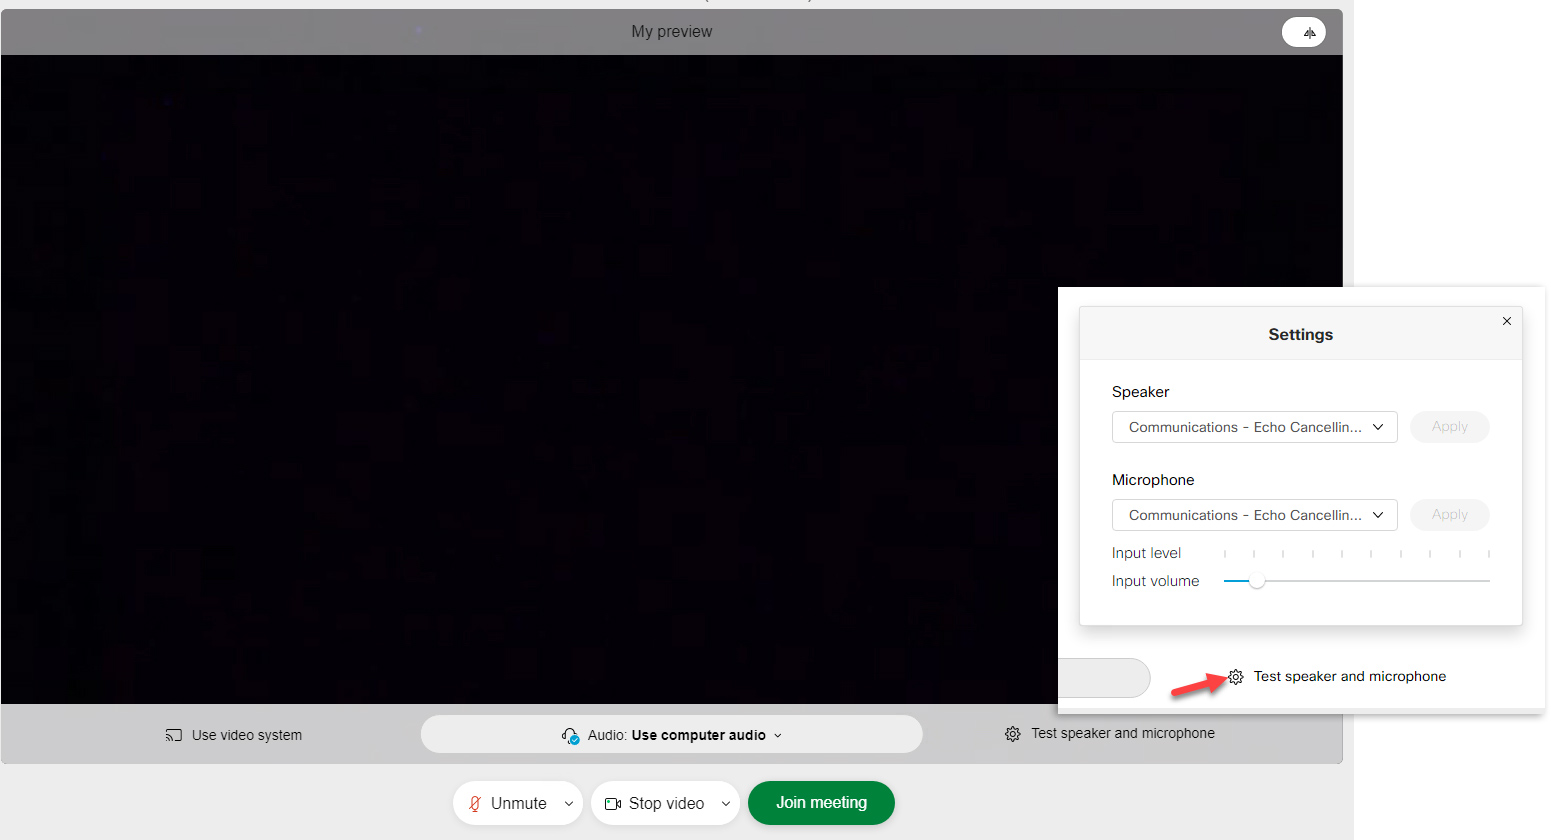 A screenshot of the webex preview screen with options to test audio